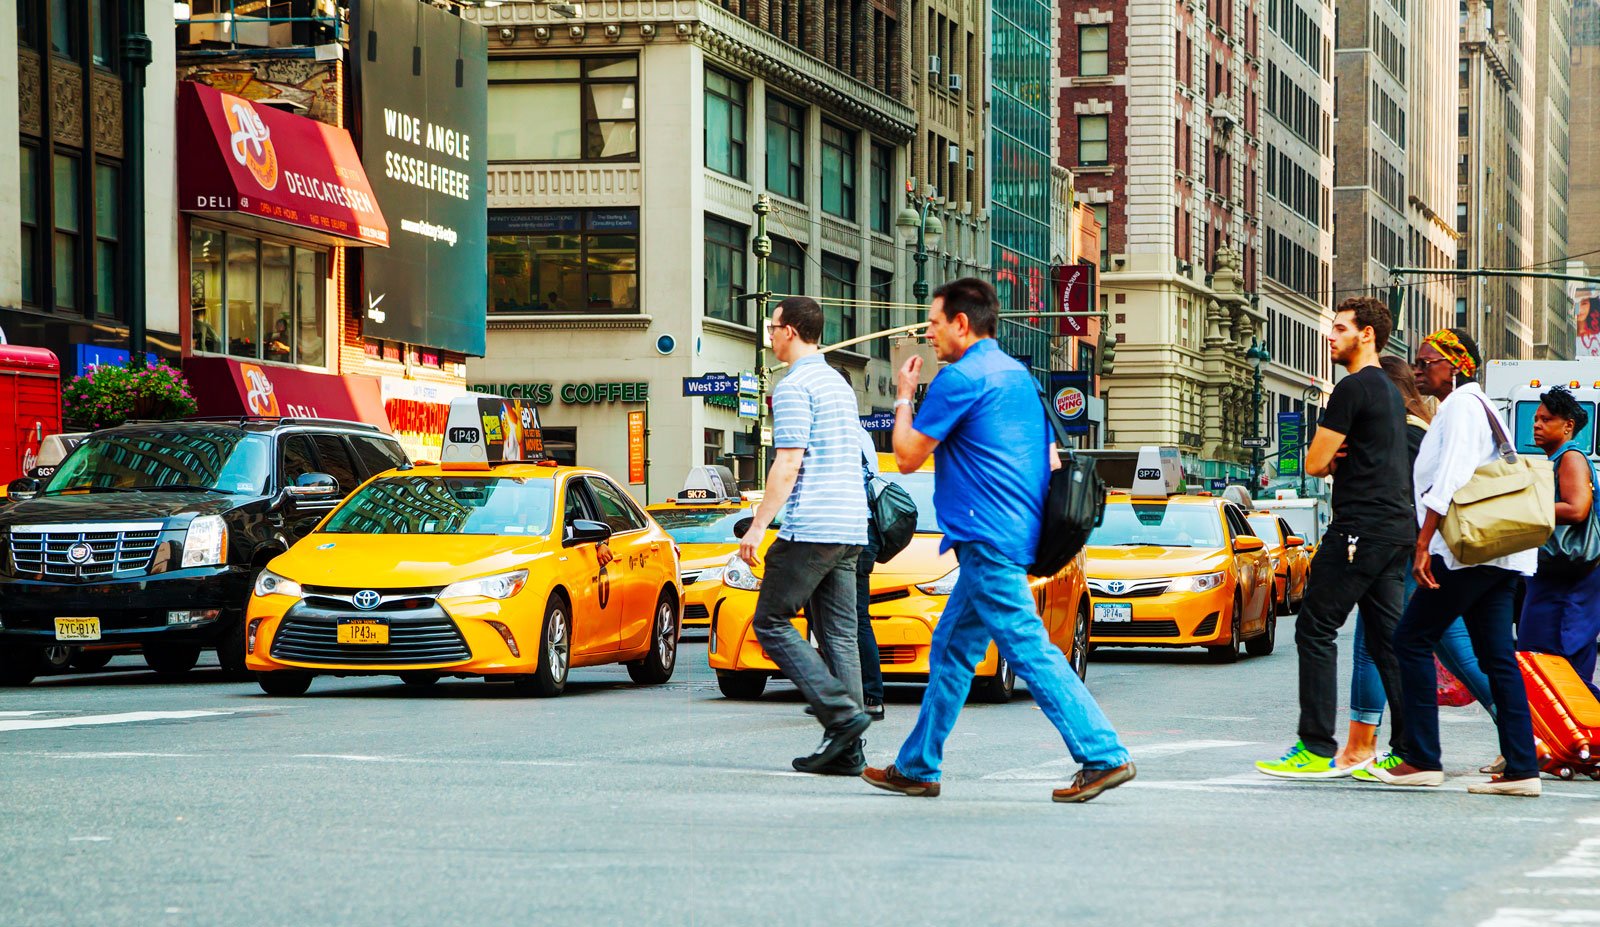 NYC-people-in-front-of-yellow-cabs.jpg